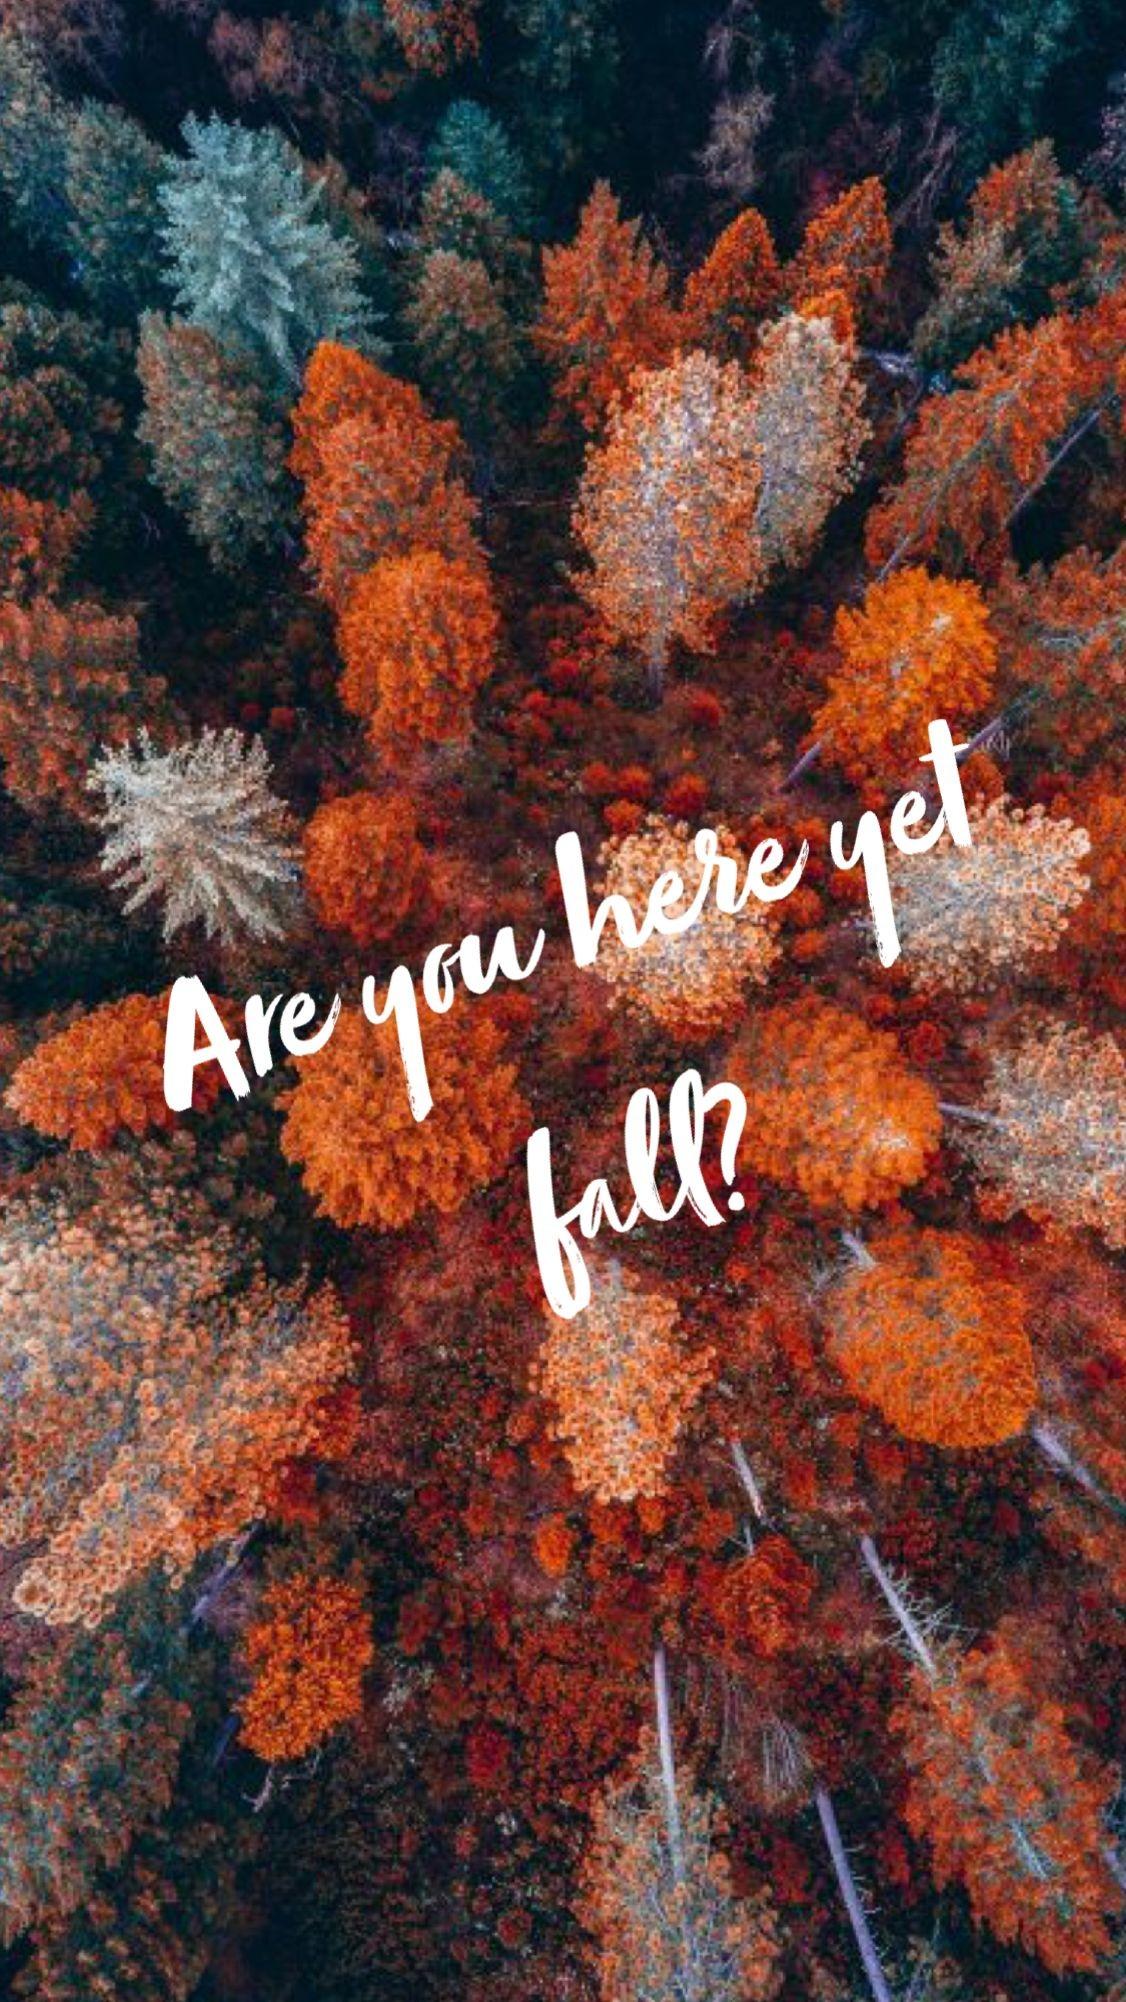 Are you here yet fall? - Coral